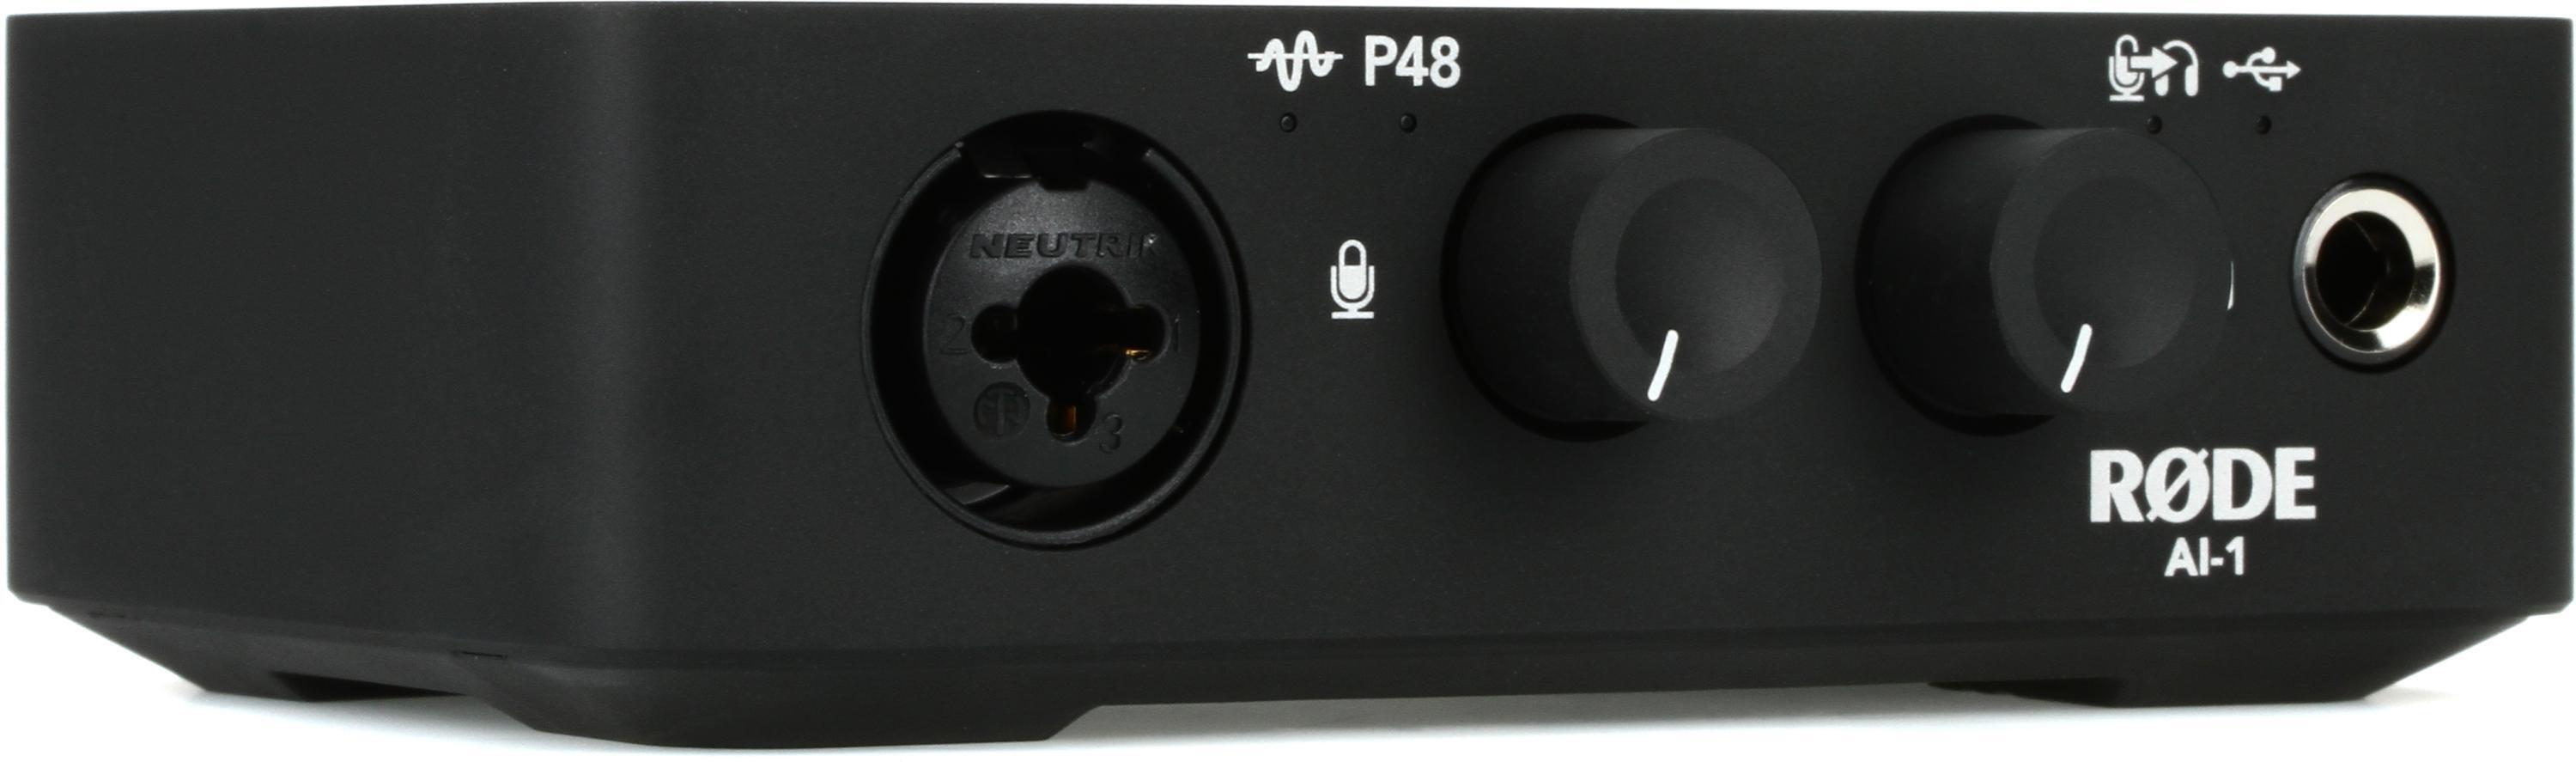 In-depth audio interface reviews: How we test and rate